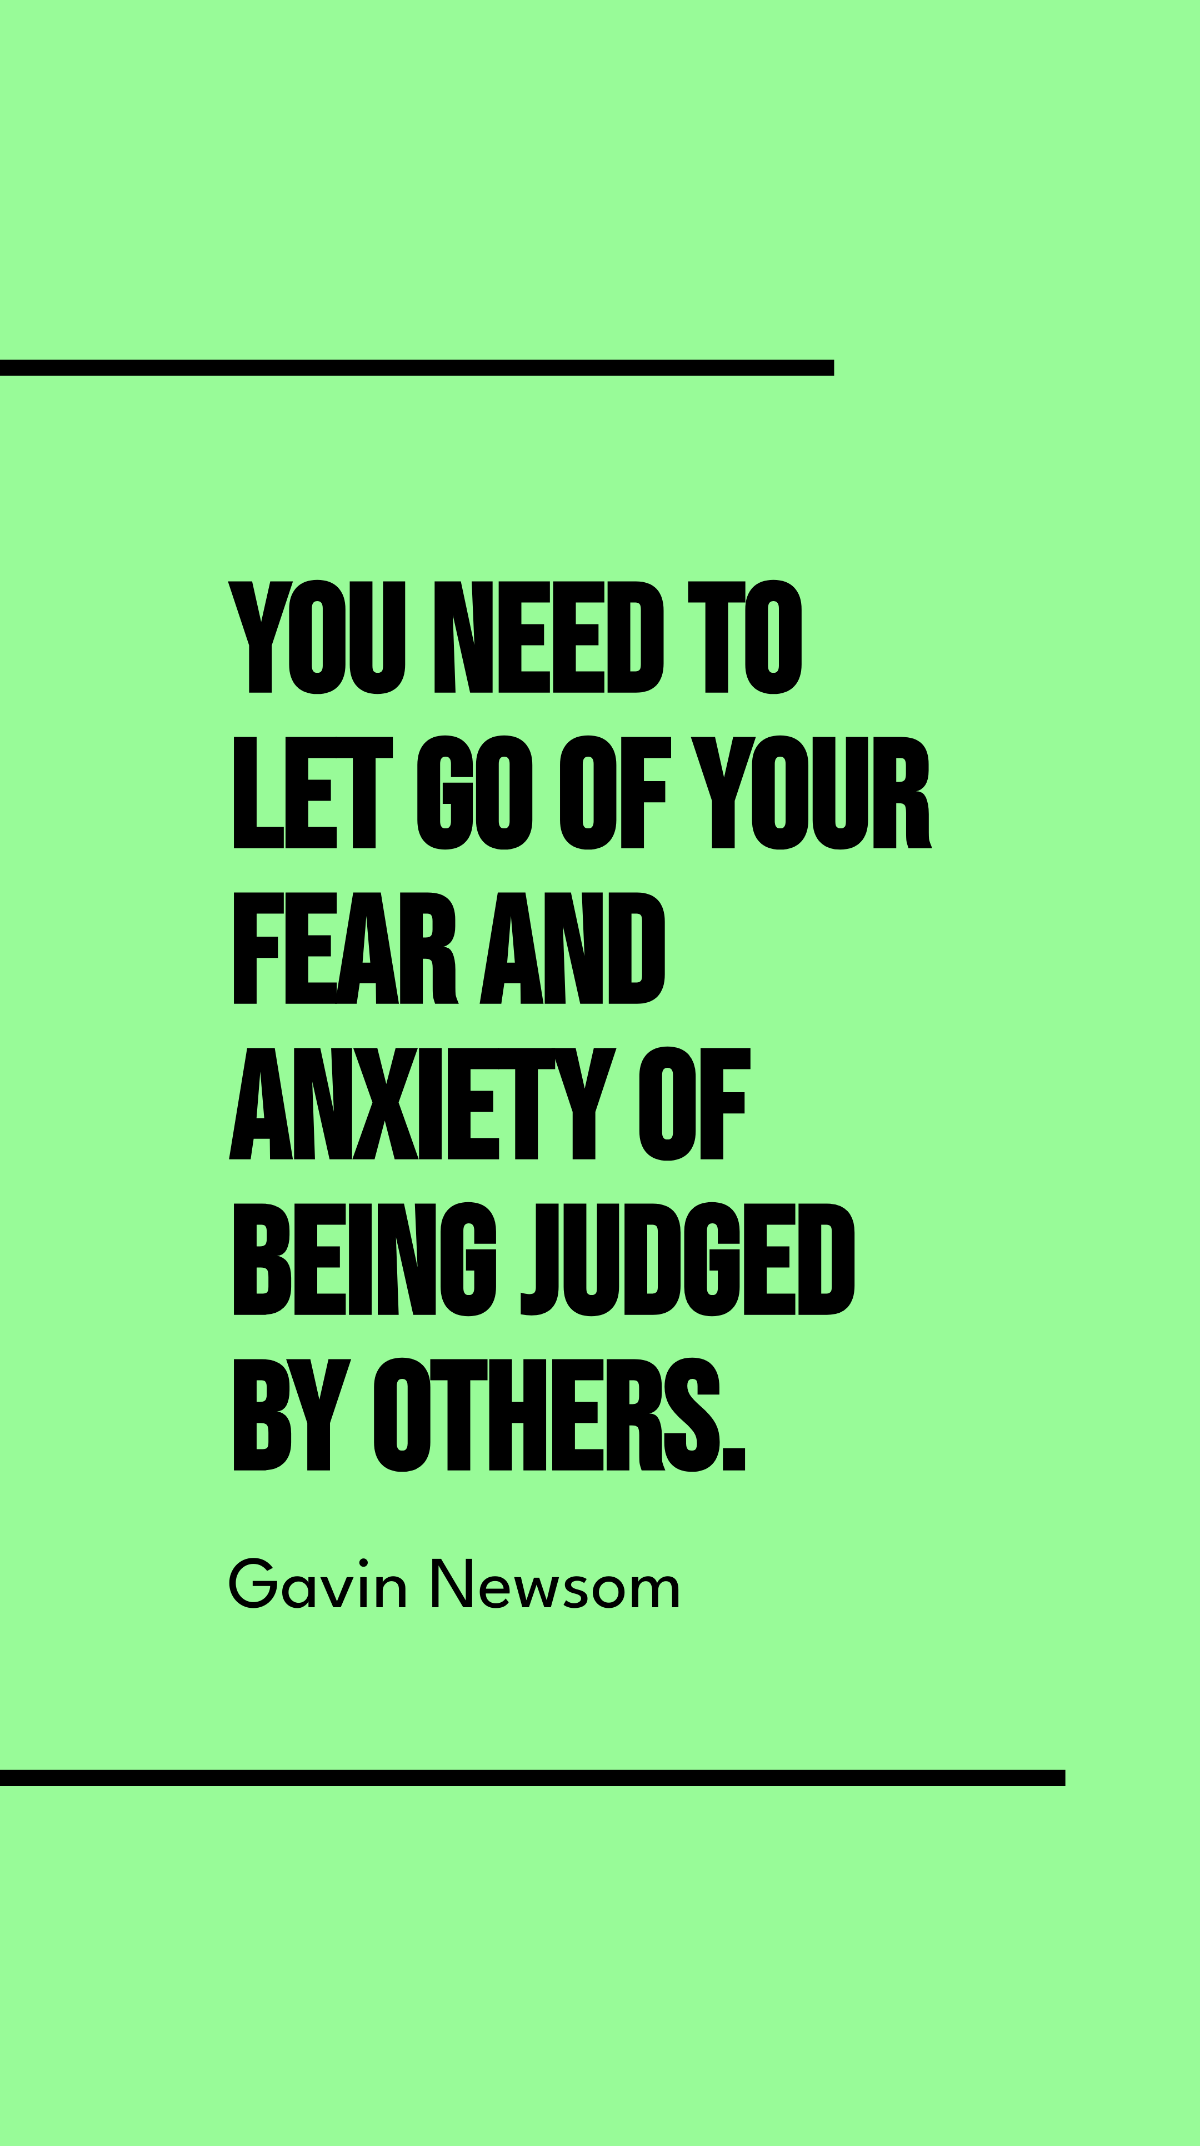 Gavin Newsom - You need to let go of your fear and anxiety of being judged by others.